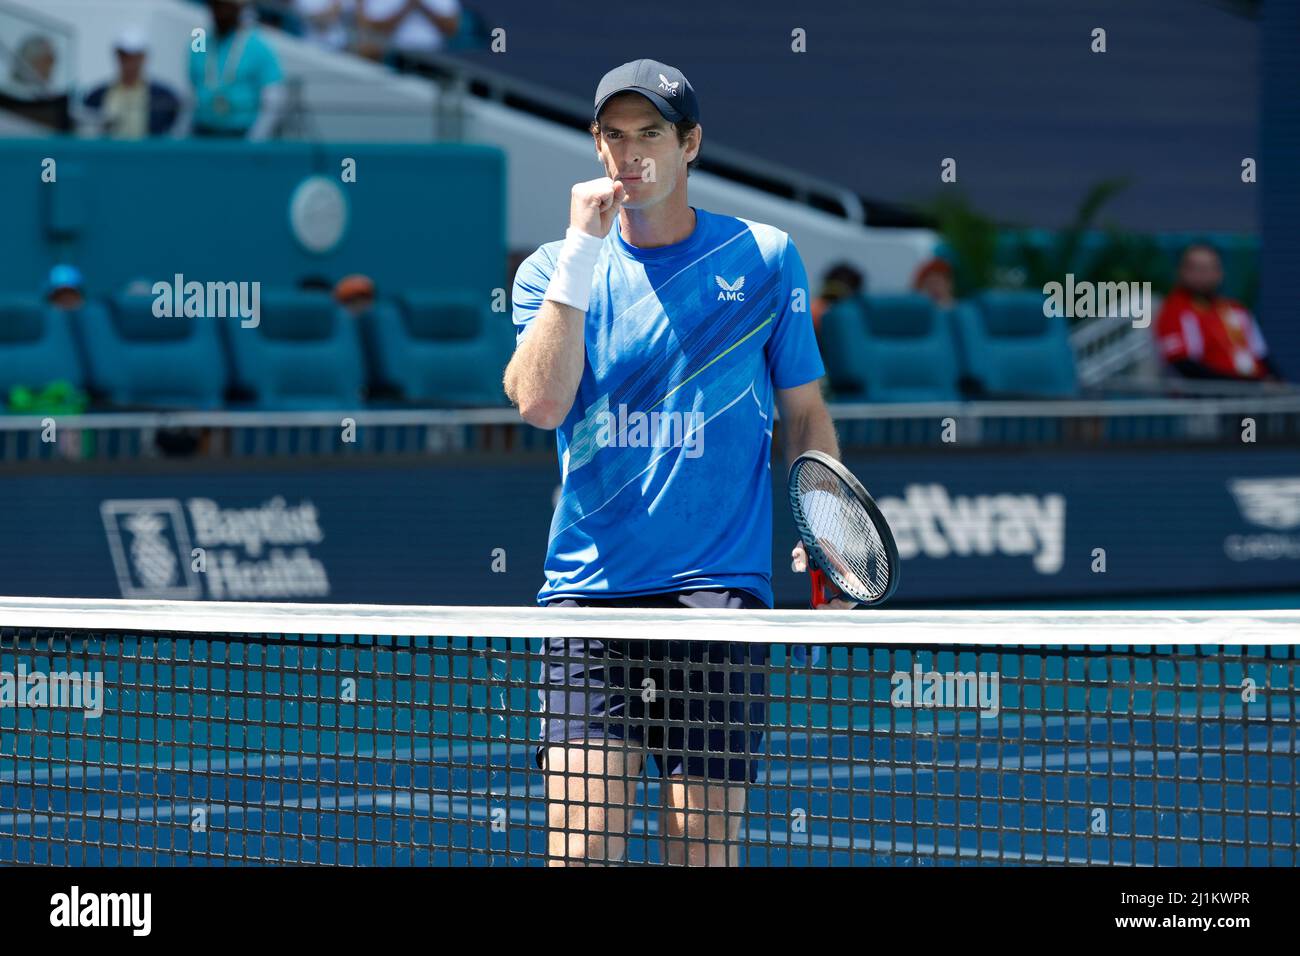 Miami Gardens, Florida, USA. 26th Mar, 2022. Daniil Medvedev of Russia defeats Andy Murray of Great Britain during day 6 of the Miami Open at Hard Rock Stadium on March 26, 2022 in Miami Gardens, Florida. People: Credit: Hoo Me/Media Punch/Alamy Live News Stock Photo